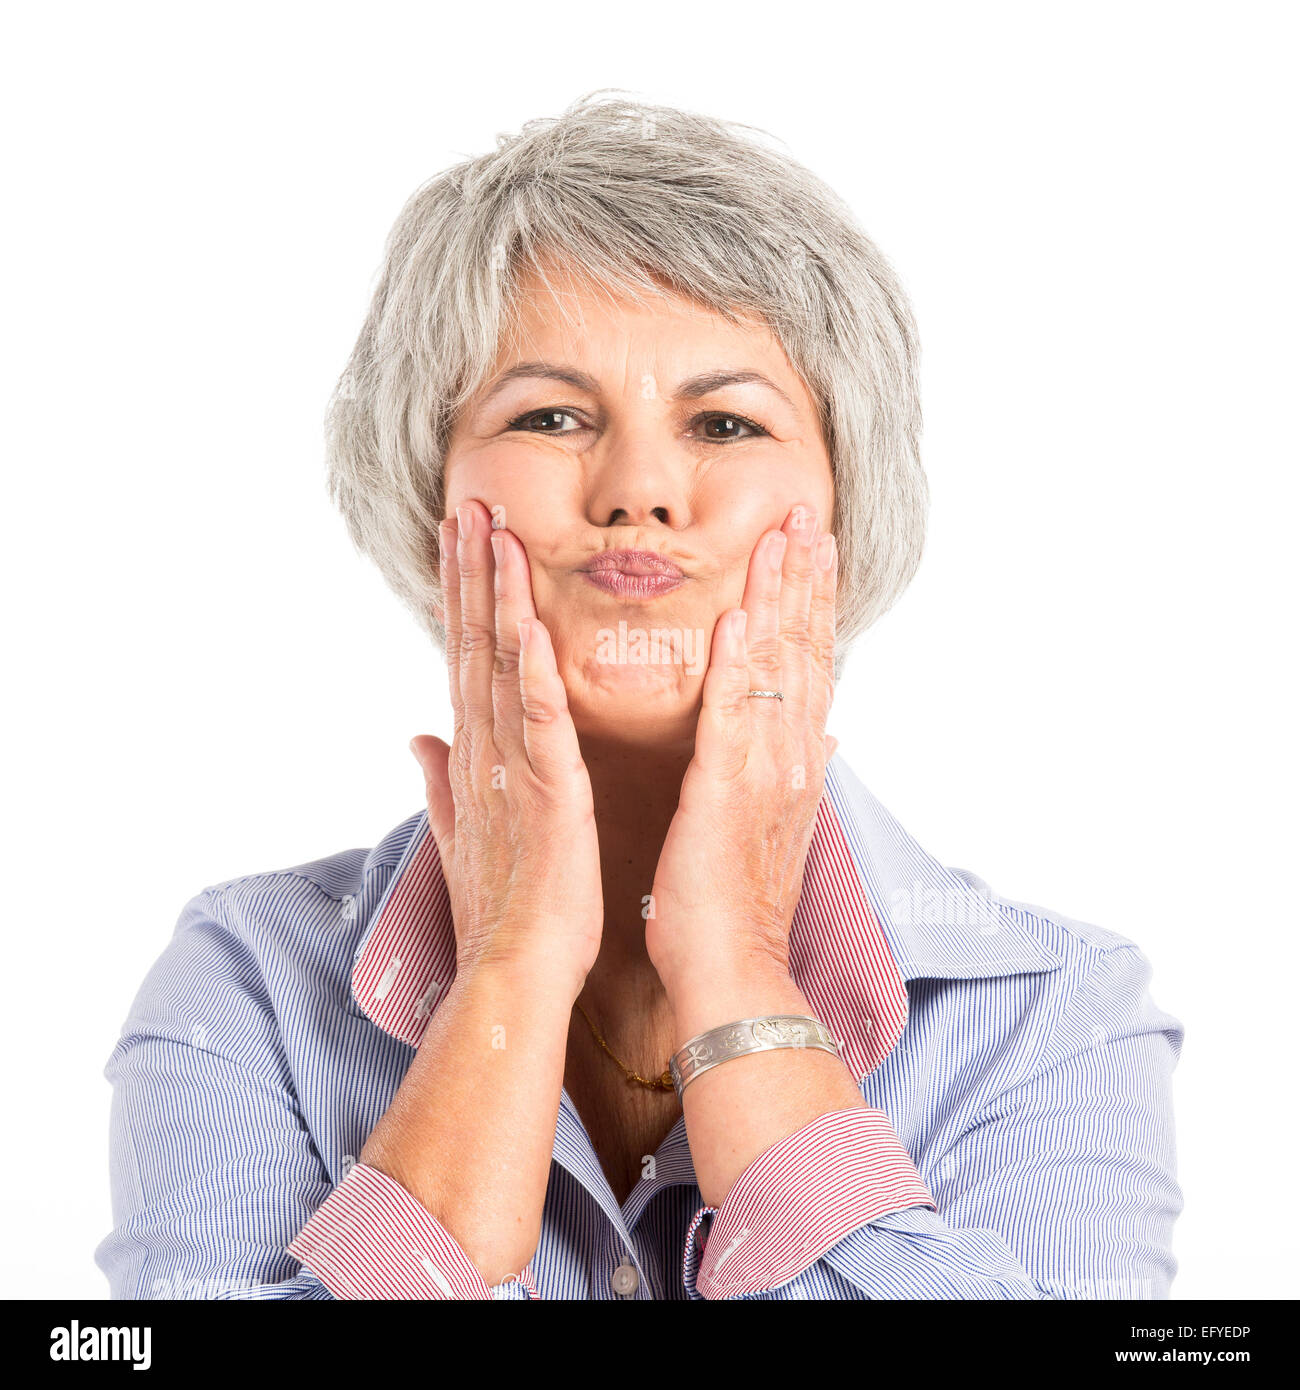 Portrait of a elderly woman making a funny face Stock Photo